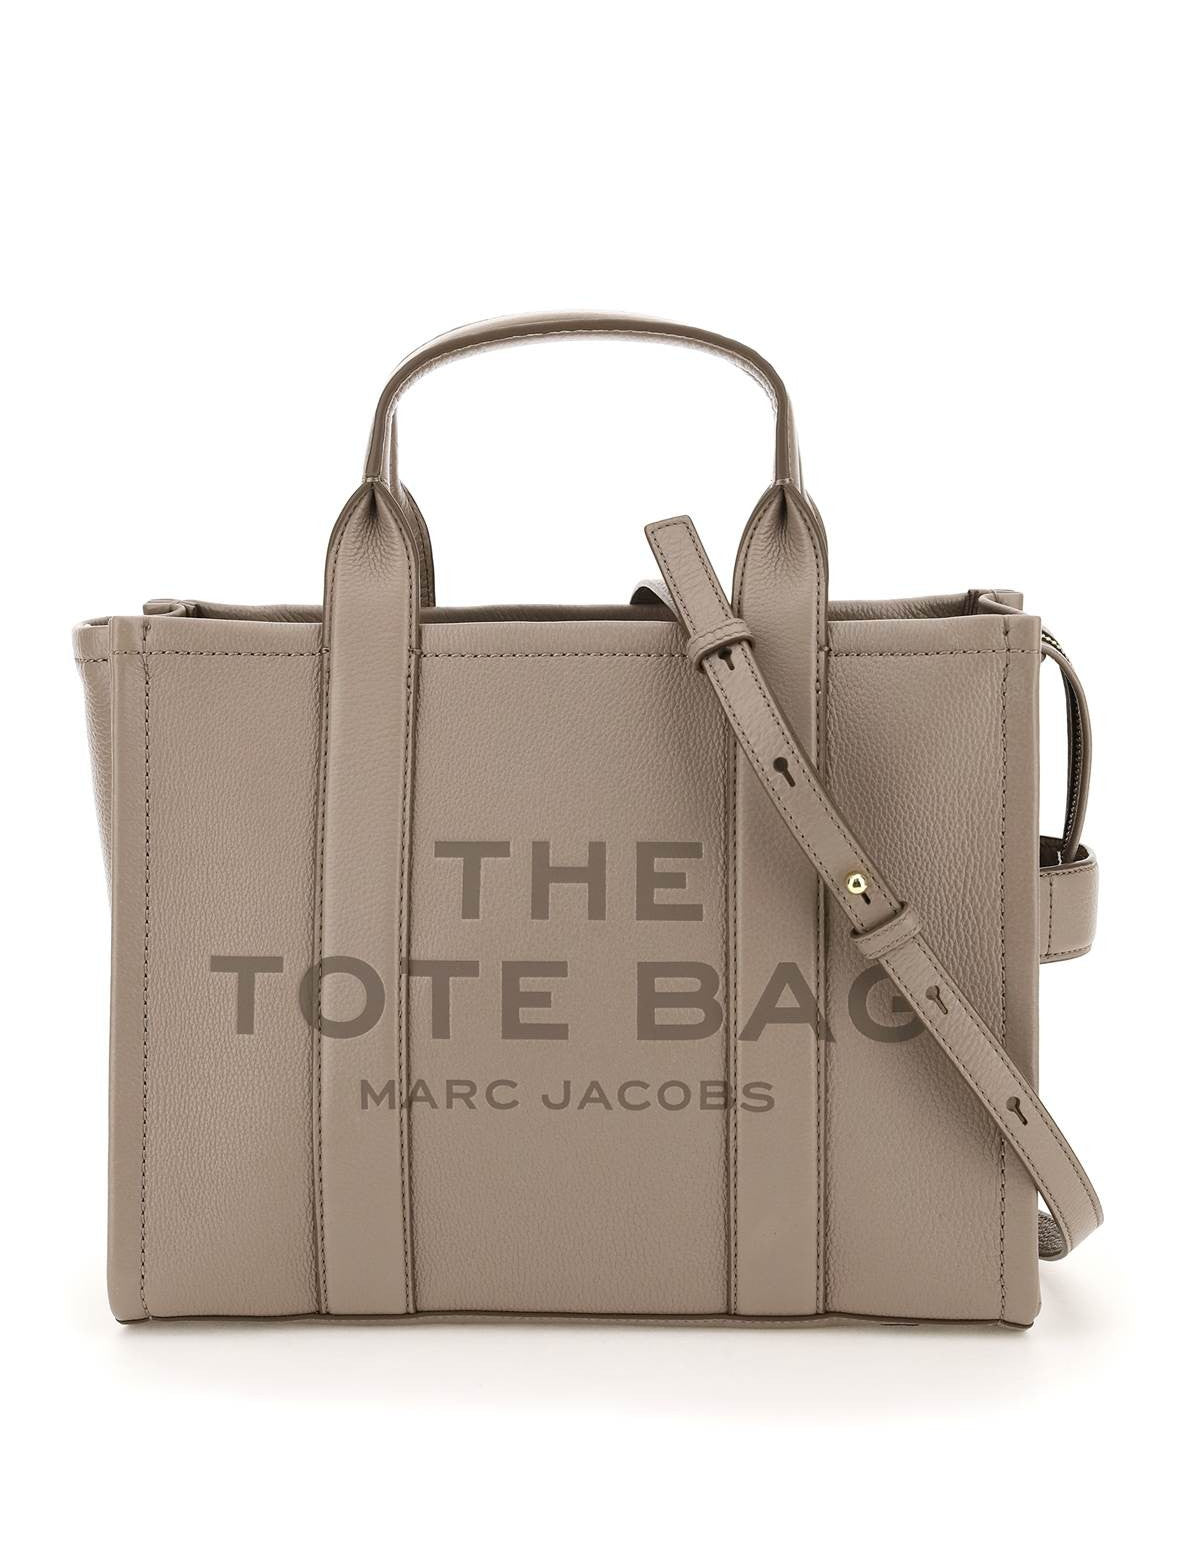 marc-jacobs-the-leather-small-tote-bag_1b938015-7c59-4bc2-9d96-fcf5ebe02aaa.jpg